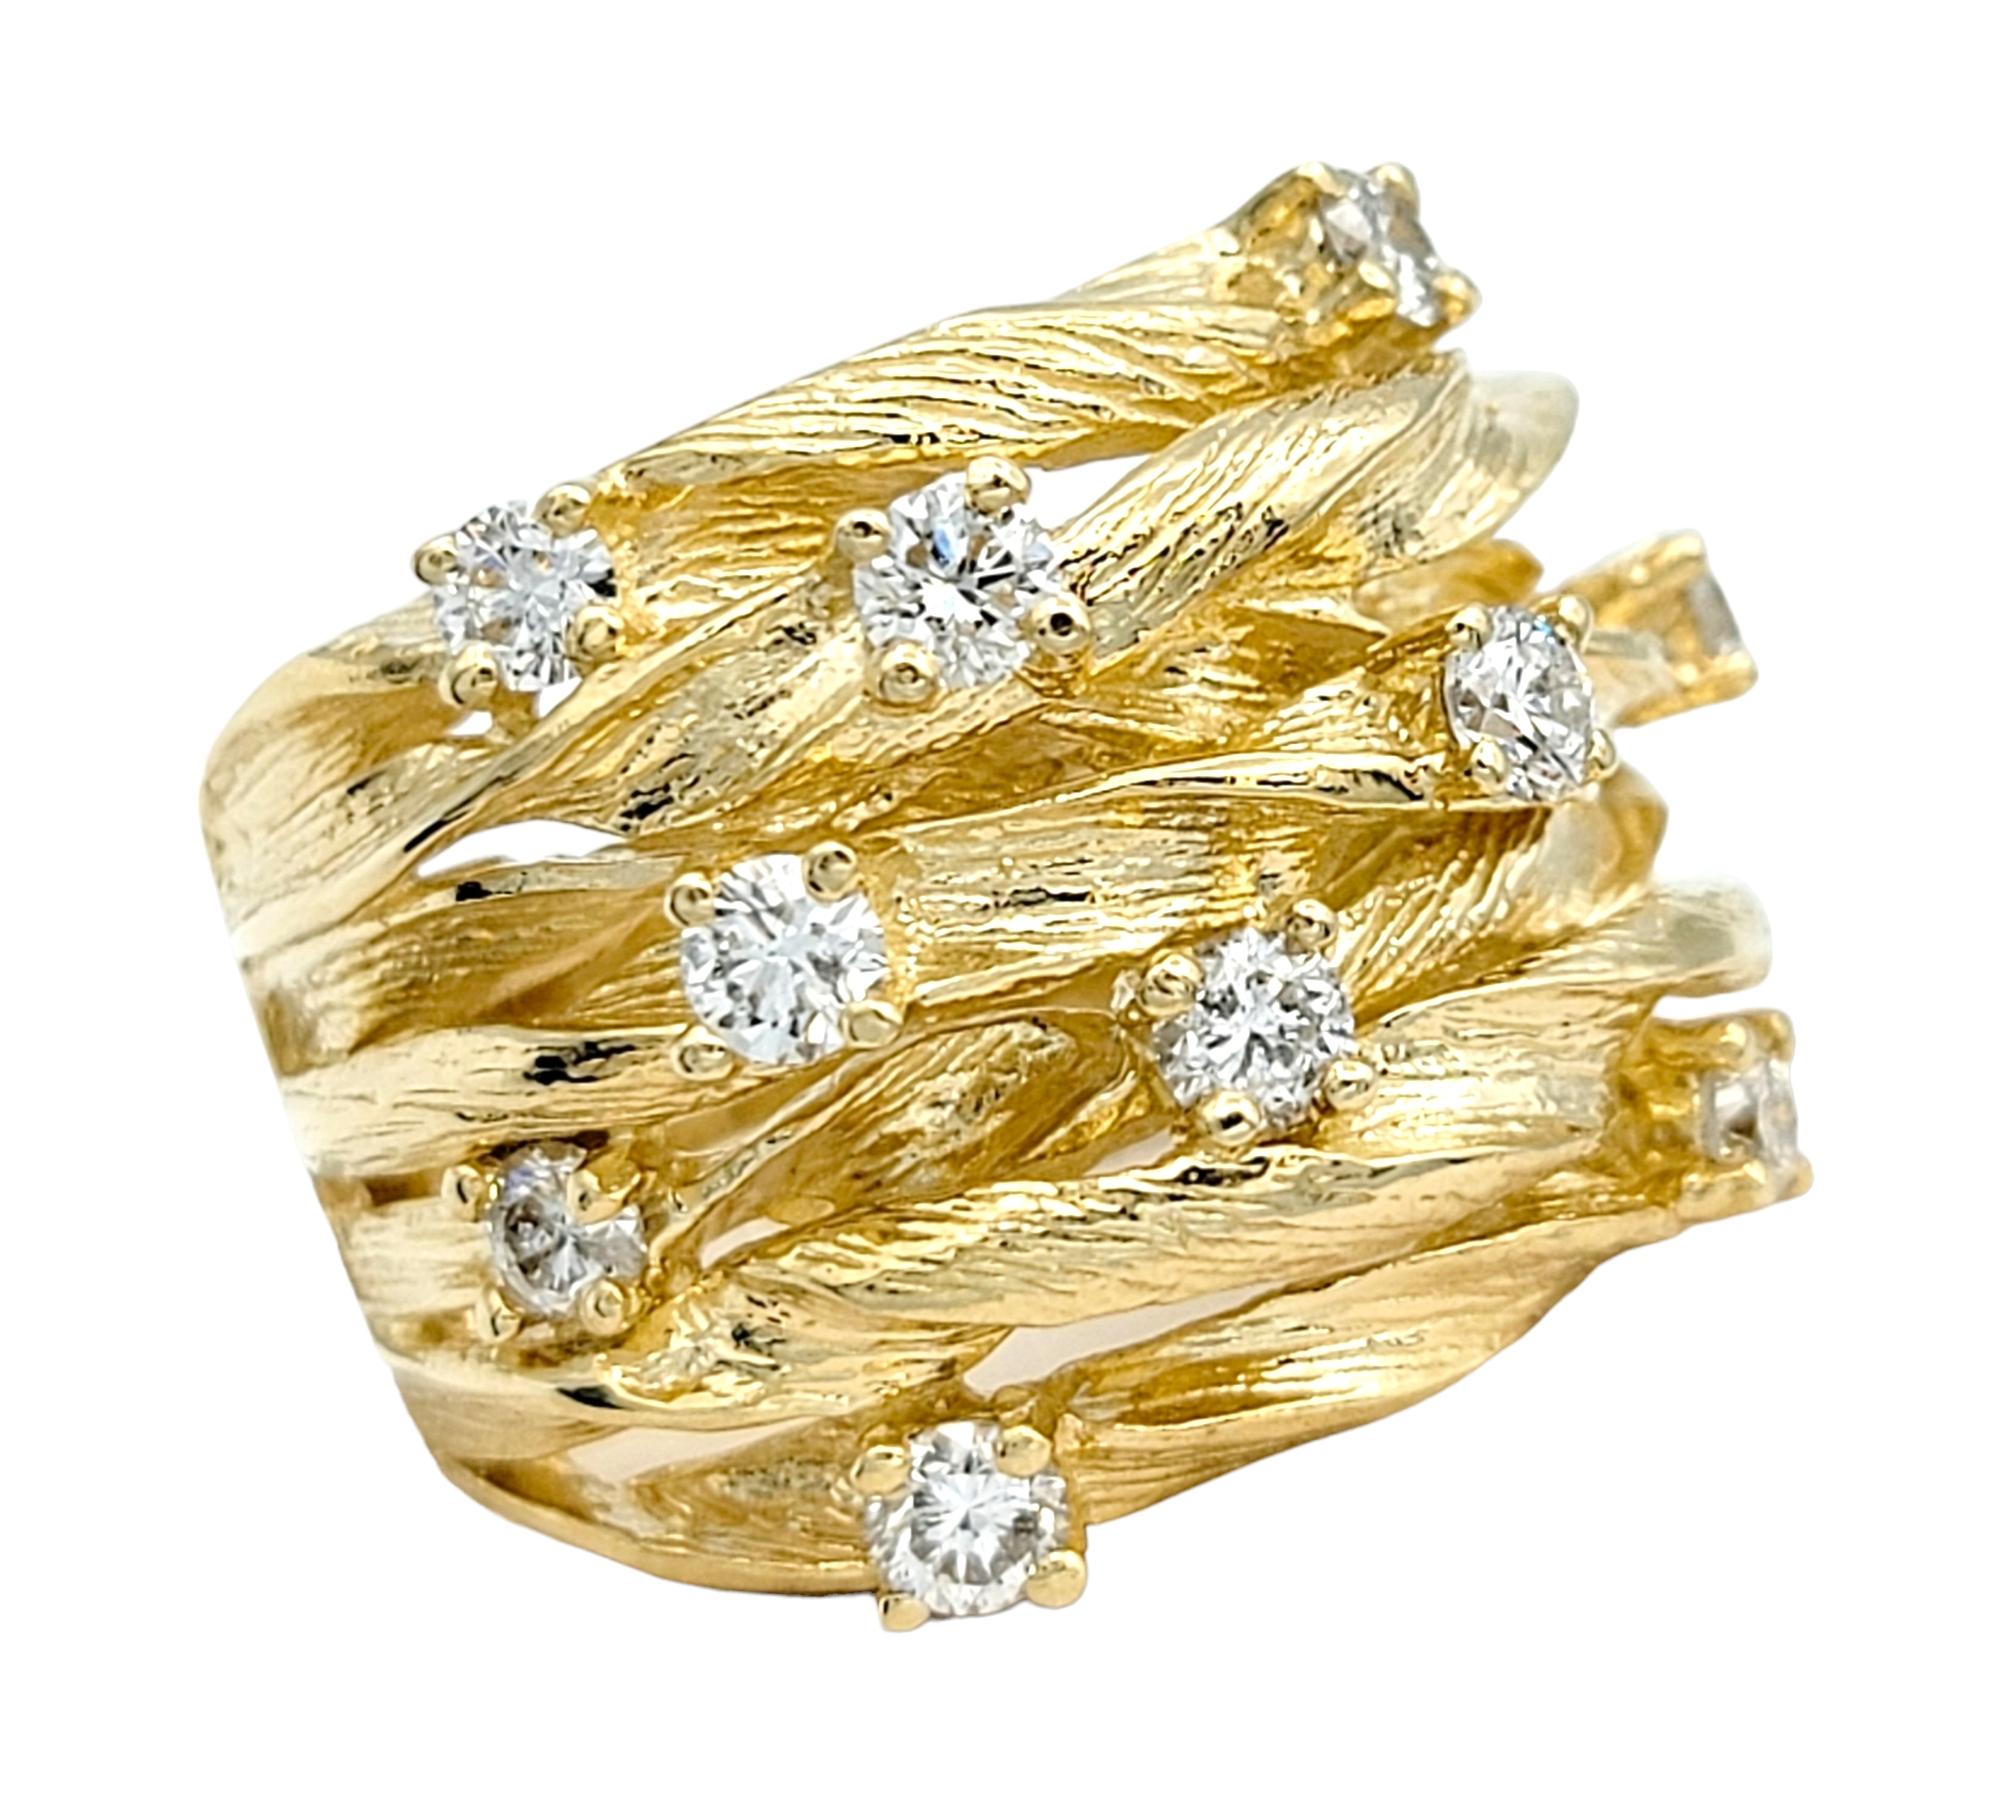 Ring Size: 7.25

This beautiful Effy D'Oro diamond band ring from the Effy Collection is a captivating and distinctive piece that seamlessly combines classic design elements with a modern twist. Crafted with precision and artistry, this wide band